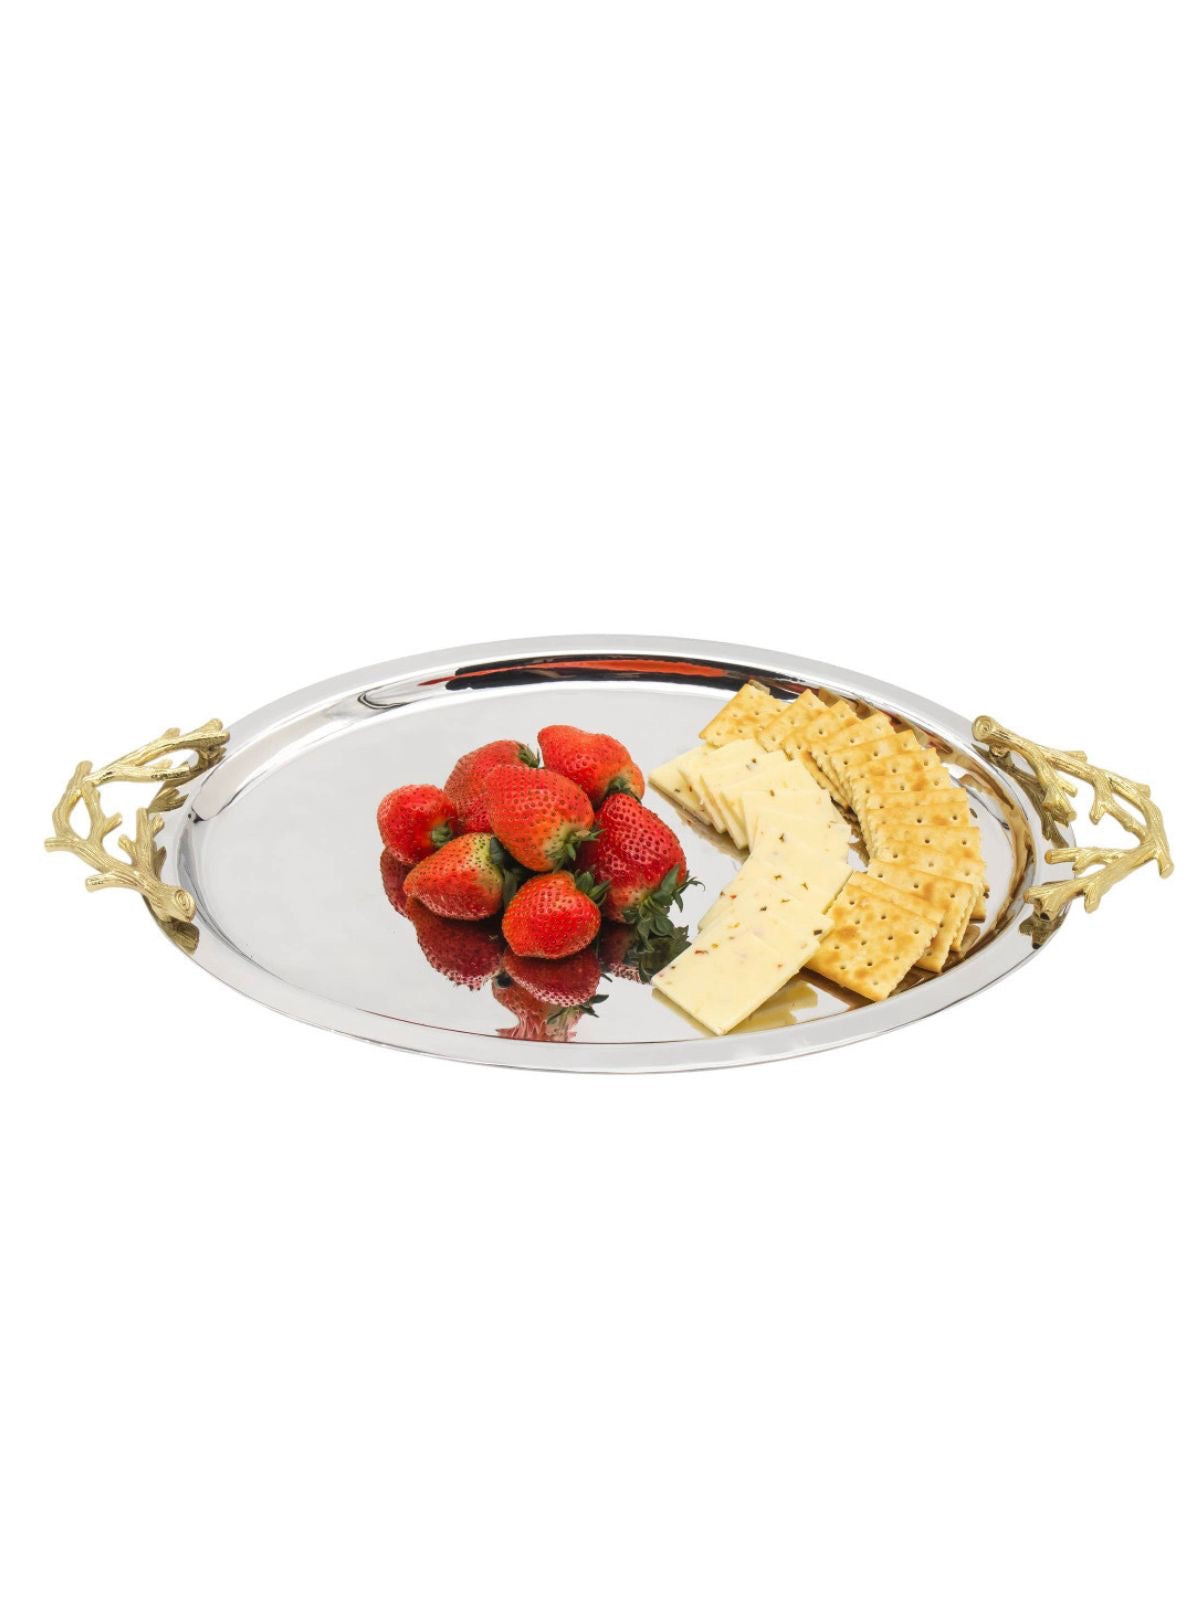 Stainless Steel Oval Tray with Gold Branch Designed Handles Sold by KYA Home Decor.